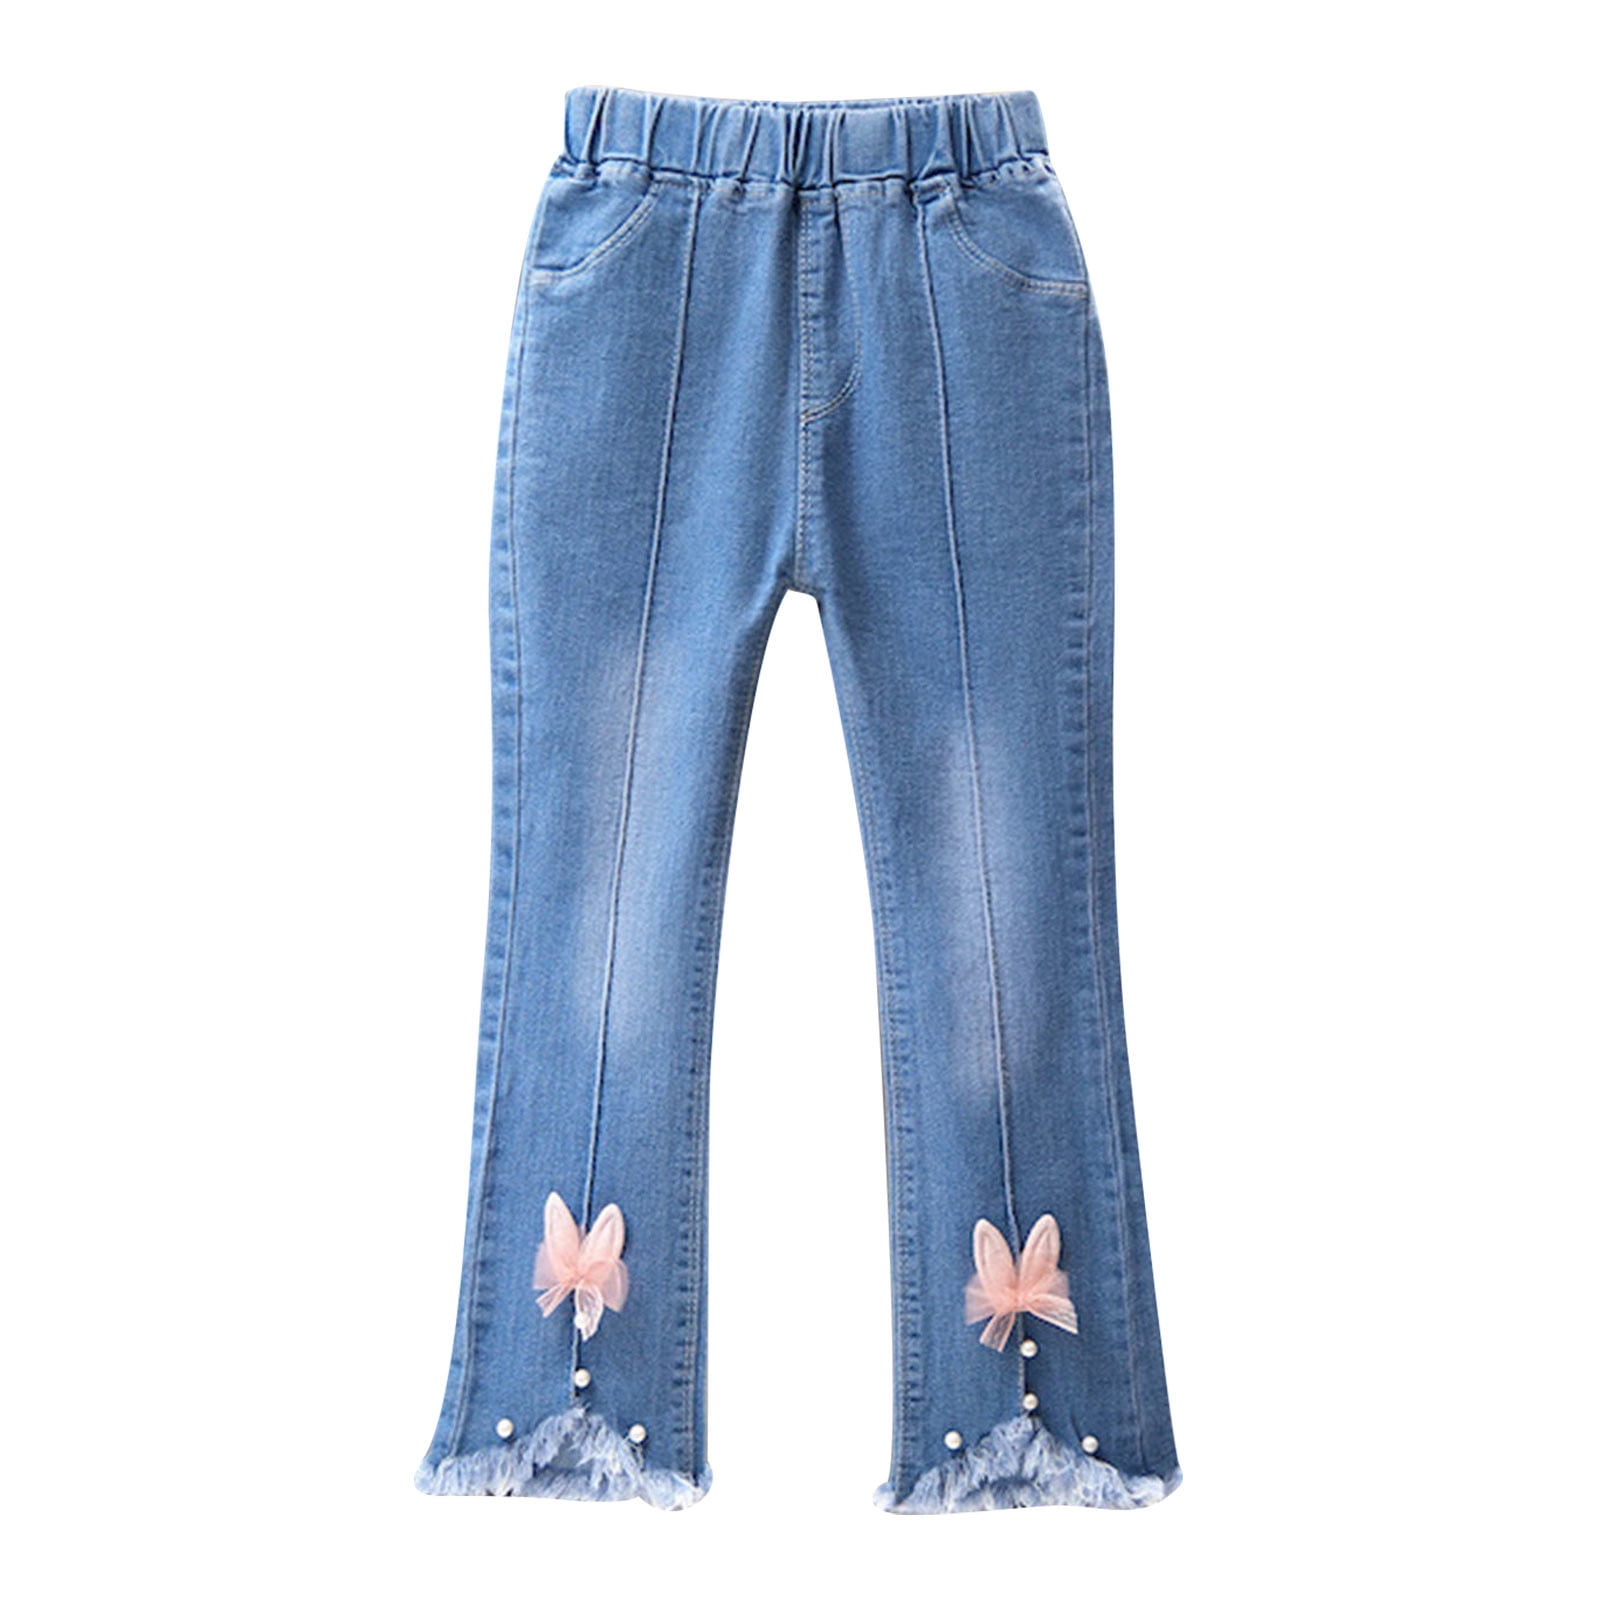 Baby Deals Spring Savings!2-13 Years Girls Flare Jeans,Girls Baggy